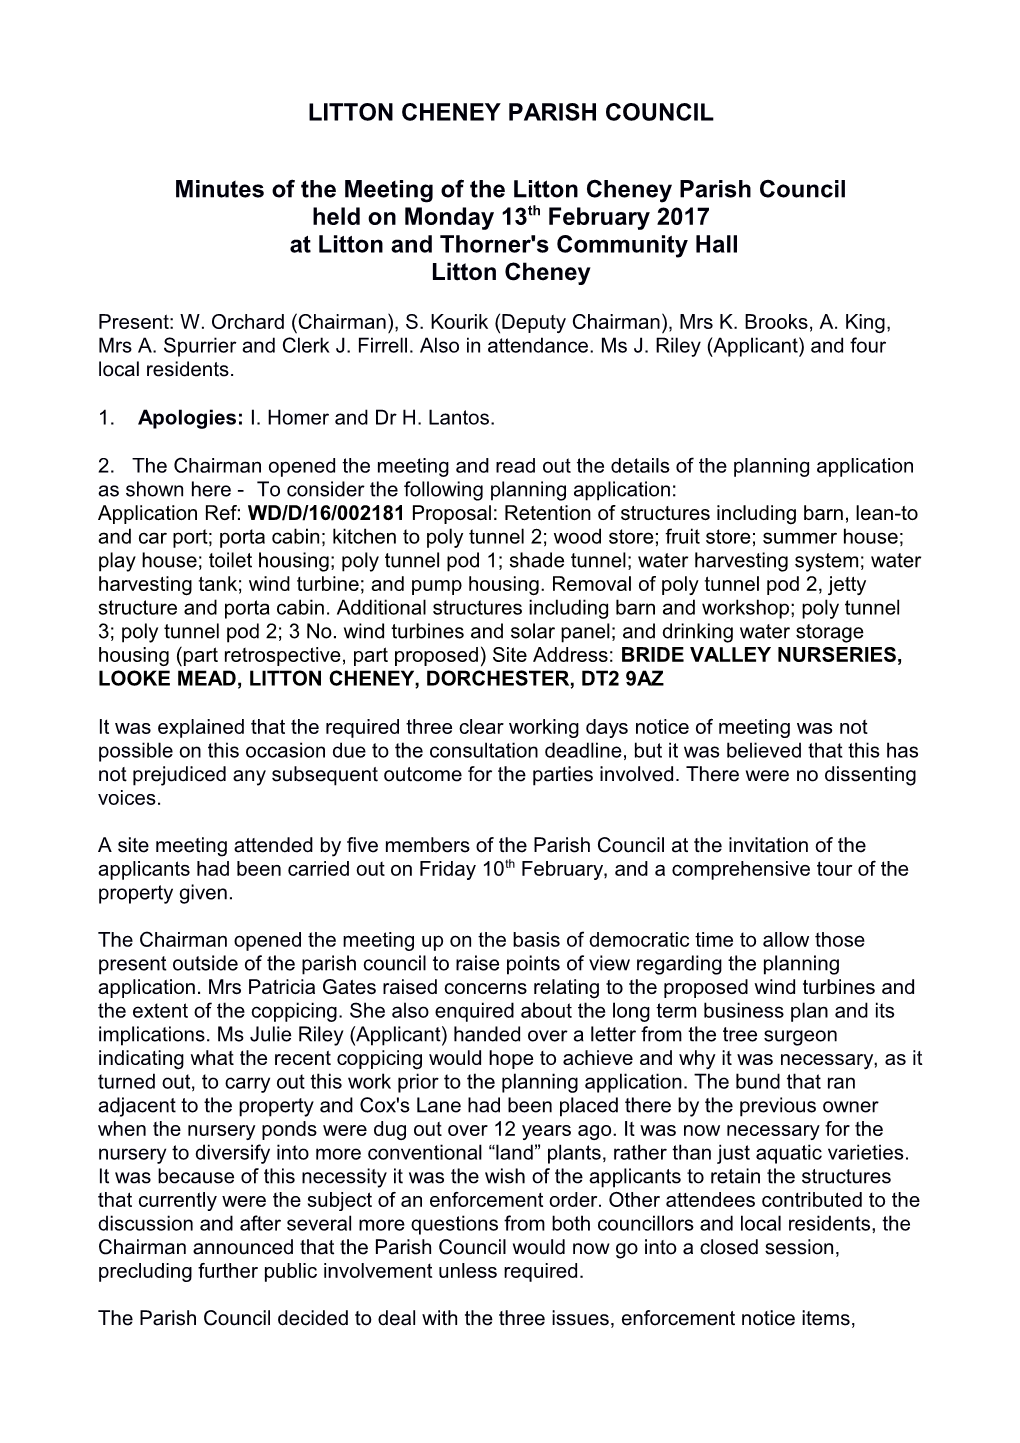 Minutes of the Meeting of the Litton Cheney Parish Council